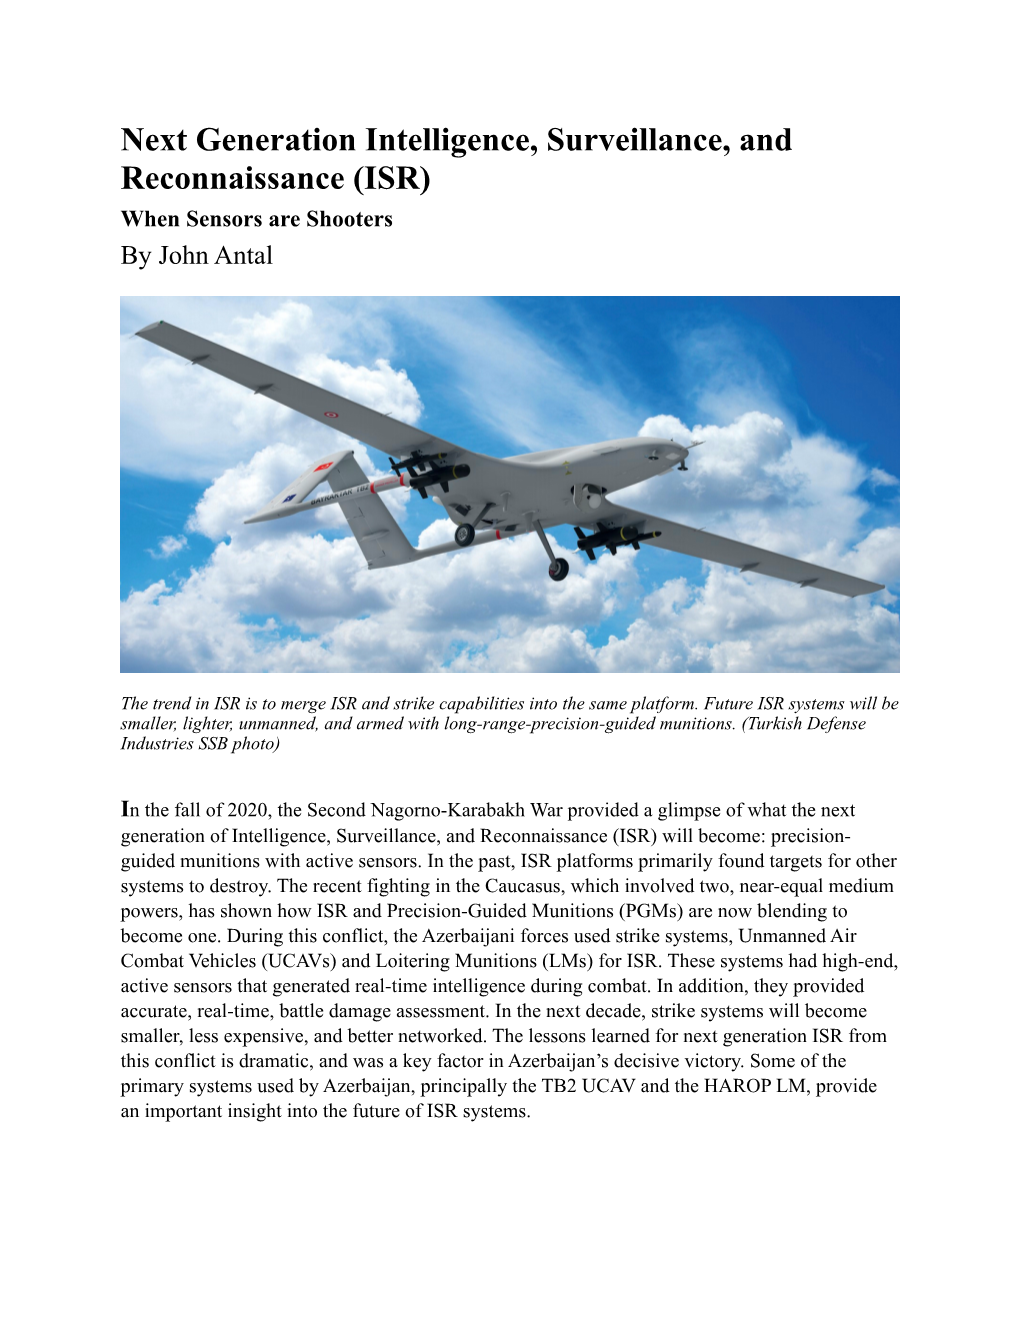 Intelligence, Surveillance, and Reconnaissance (ISR) When Sensors Are Shooters by John Antal